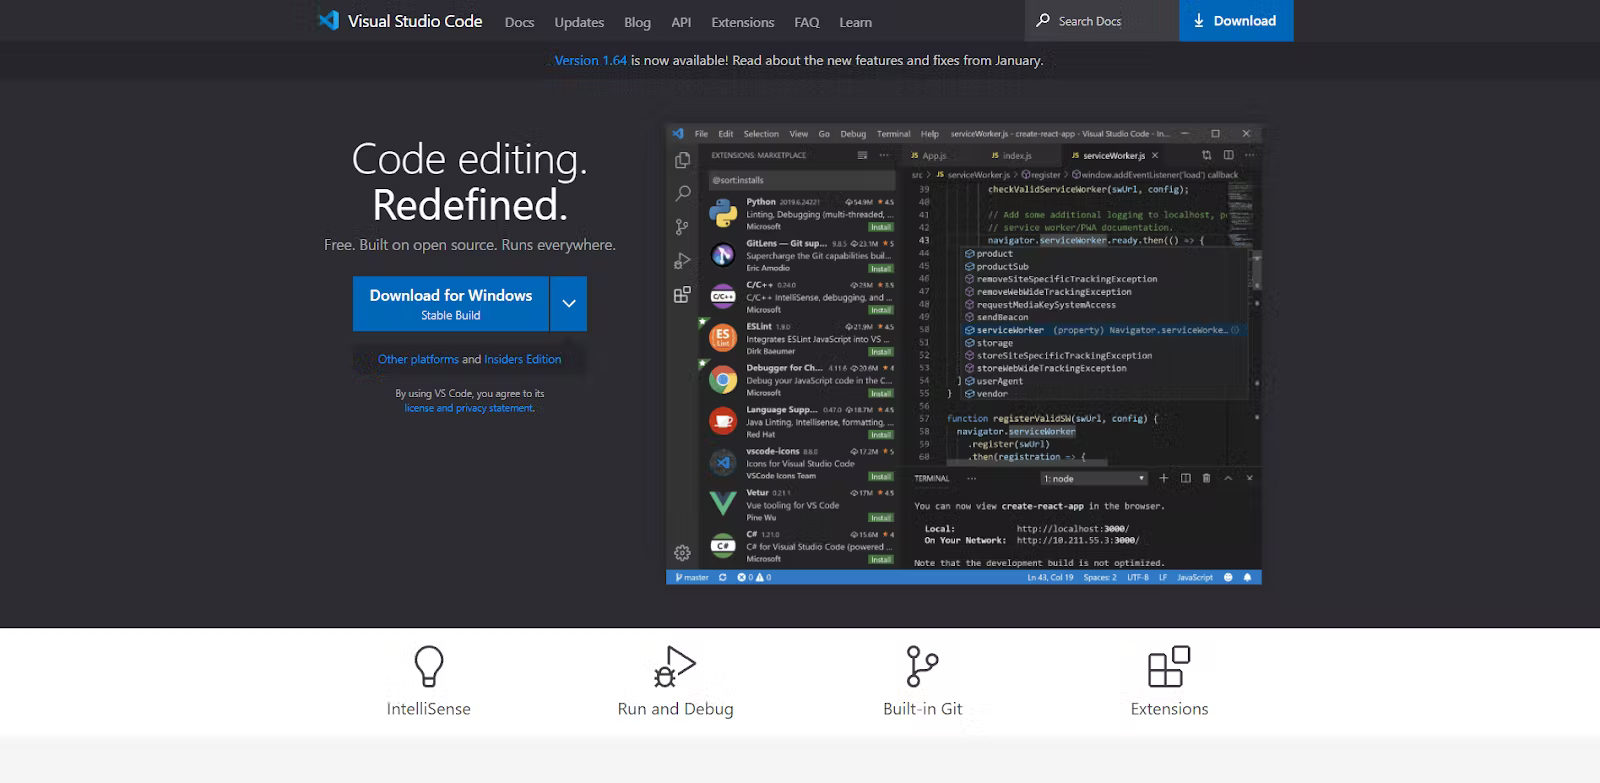 visual studio code is the best IDE on our list